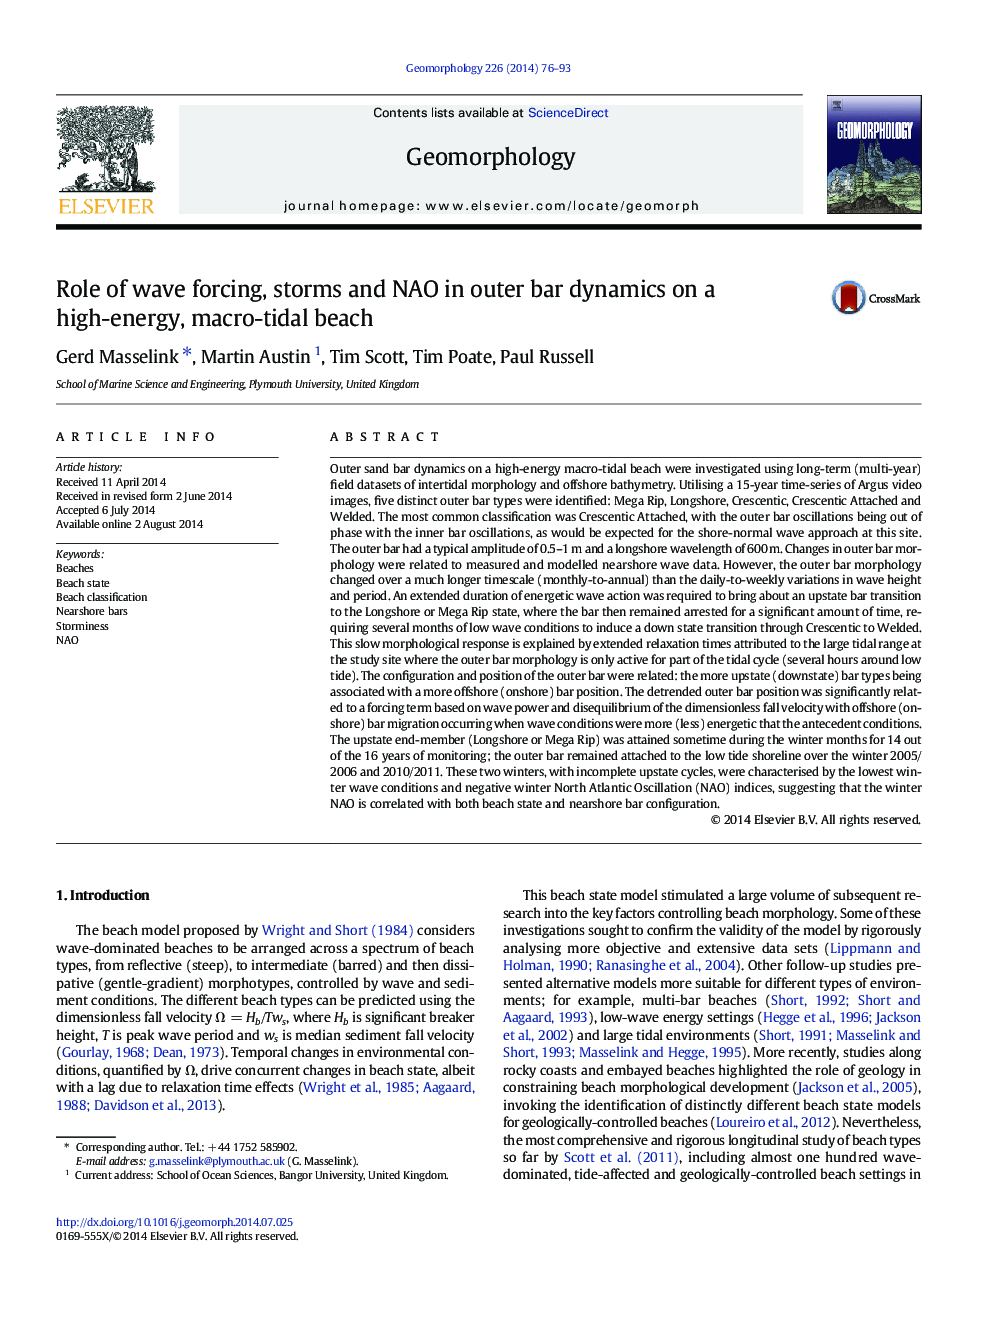 Role of wave forcing, storms and NAO in outer bar dynamics on a high-energy, macro-tidal beach